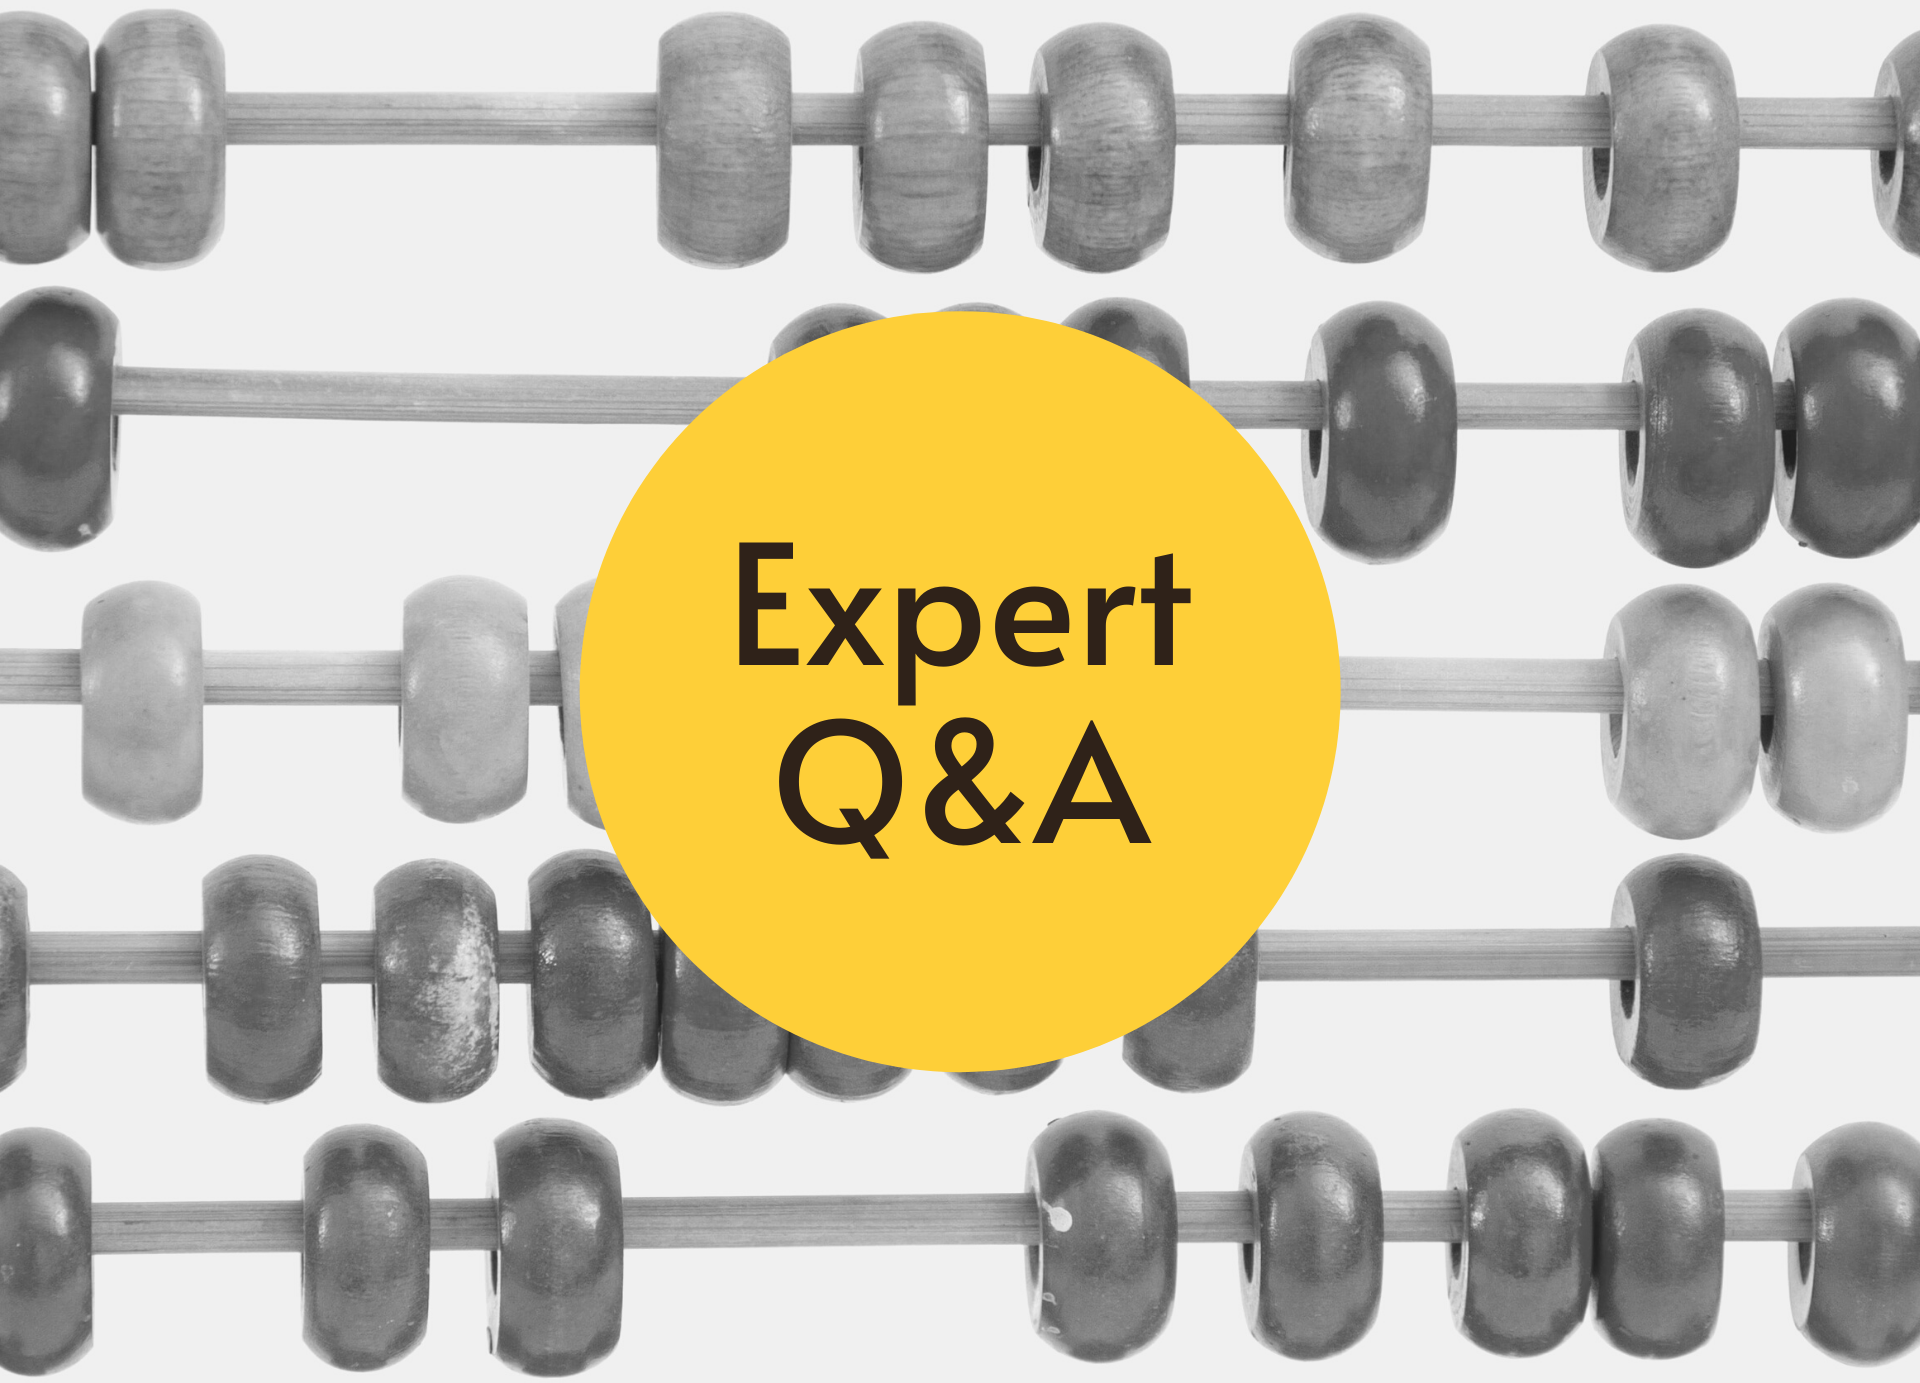 An abacus in black and white, with the words "Expert Q&A" superimposed on a yellow circle